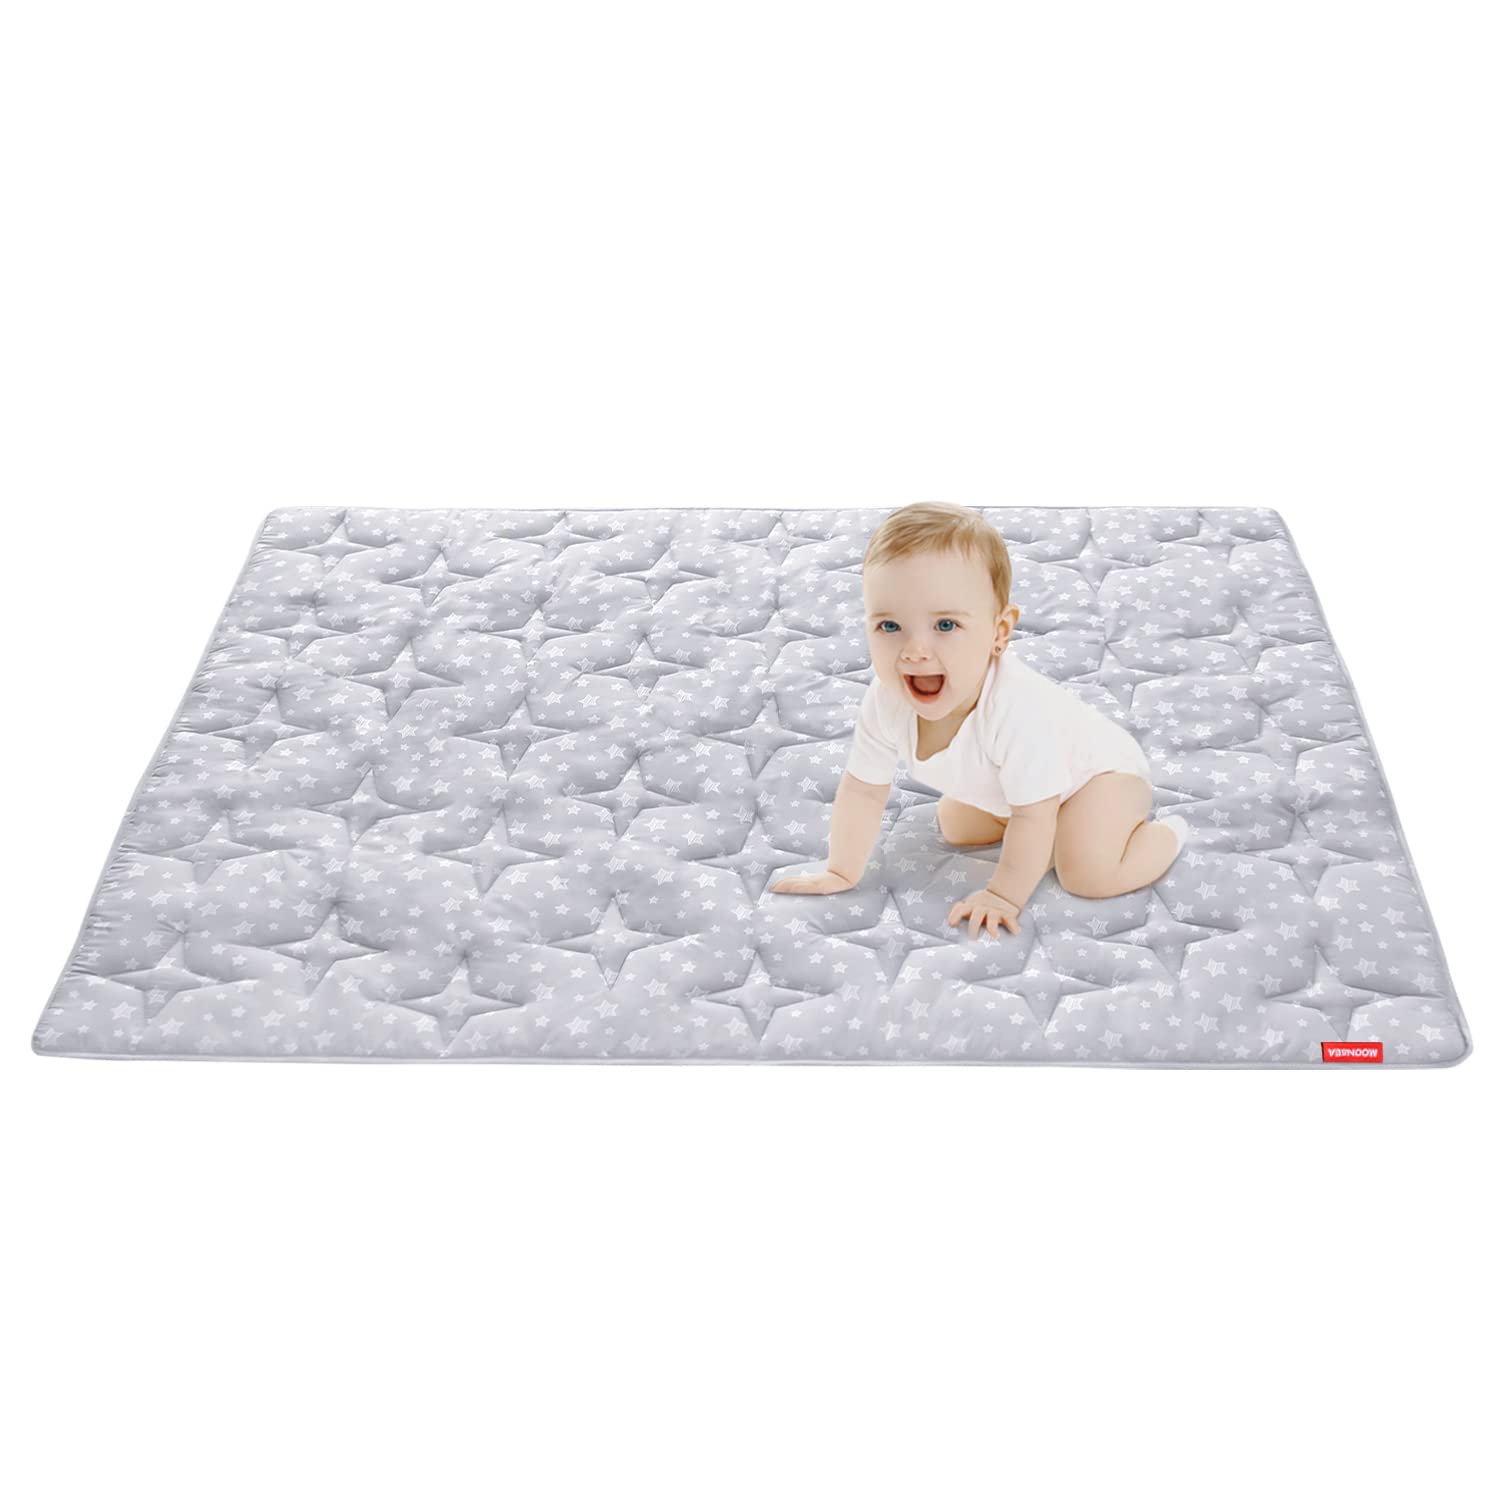 Baby Play Mat | Playpen Mat - Large Padded Tummy Time Activity Mat for Infant & Toddler, Grey Star - Moonsea Bedding